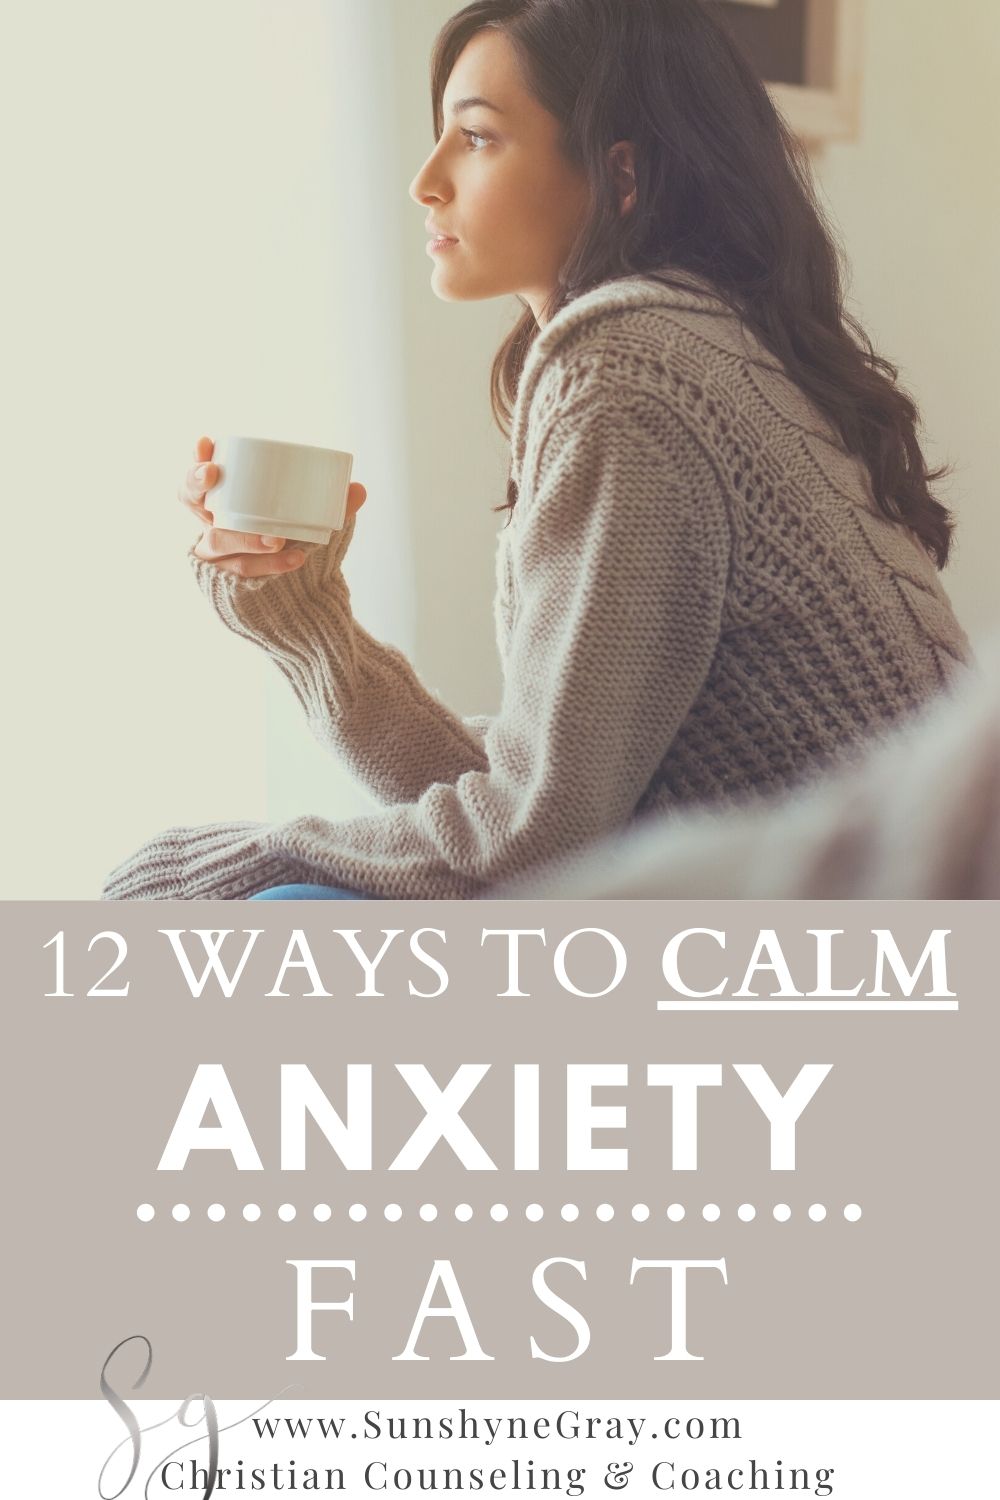 How to calm anxiety fast